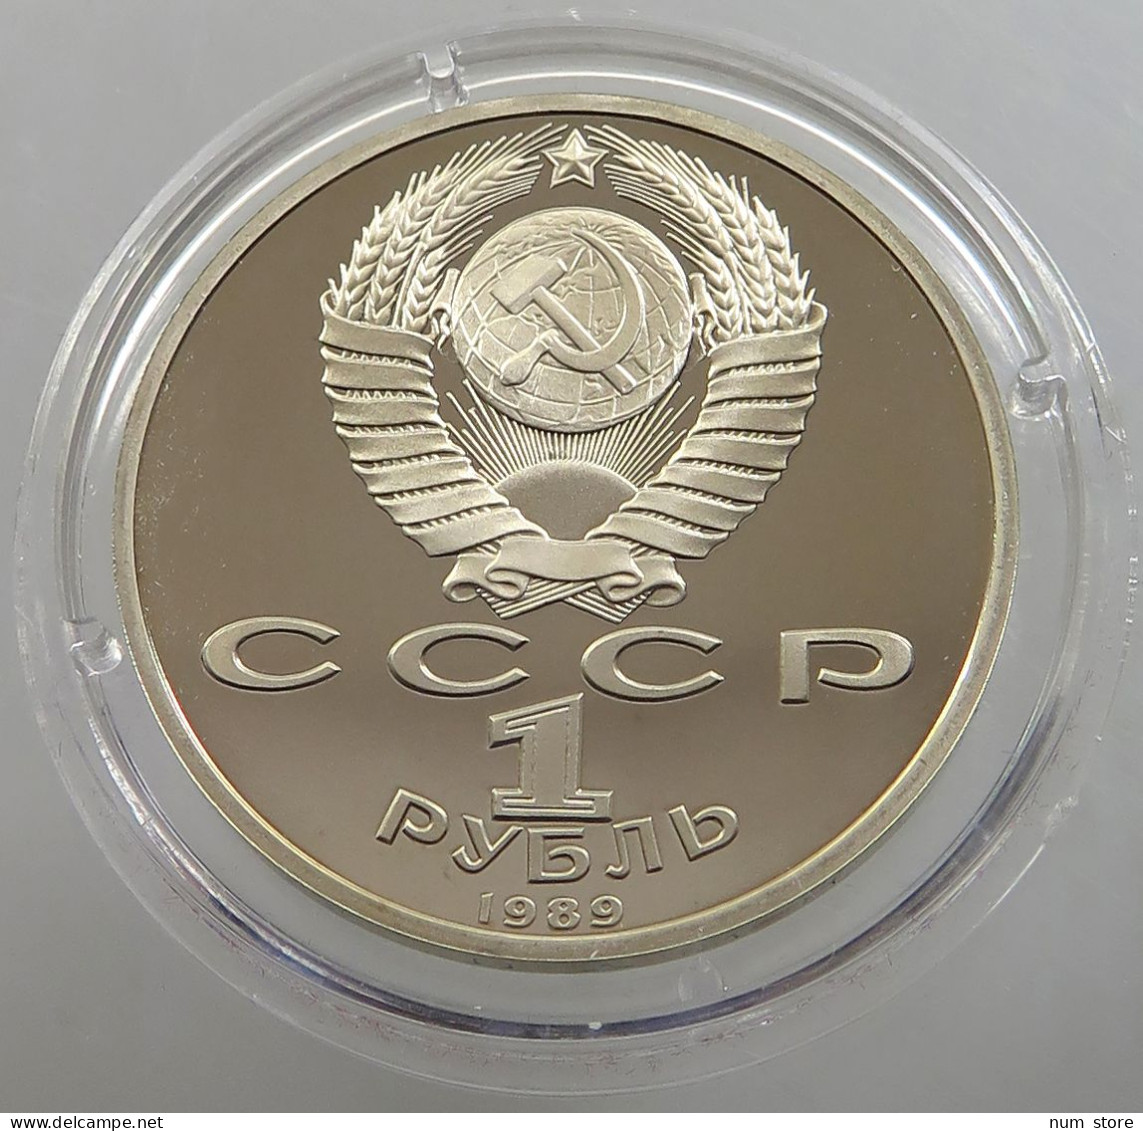 RUSSIA USSR 1 ROUBLE 1989 LERMONTOV PROOF #sm14 0475 - Rusland